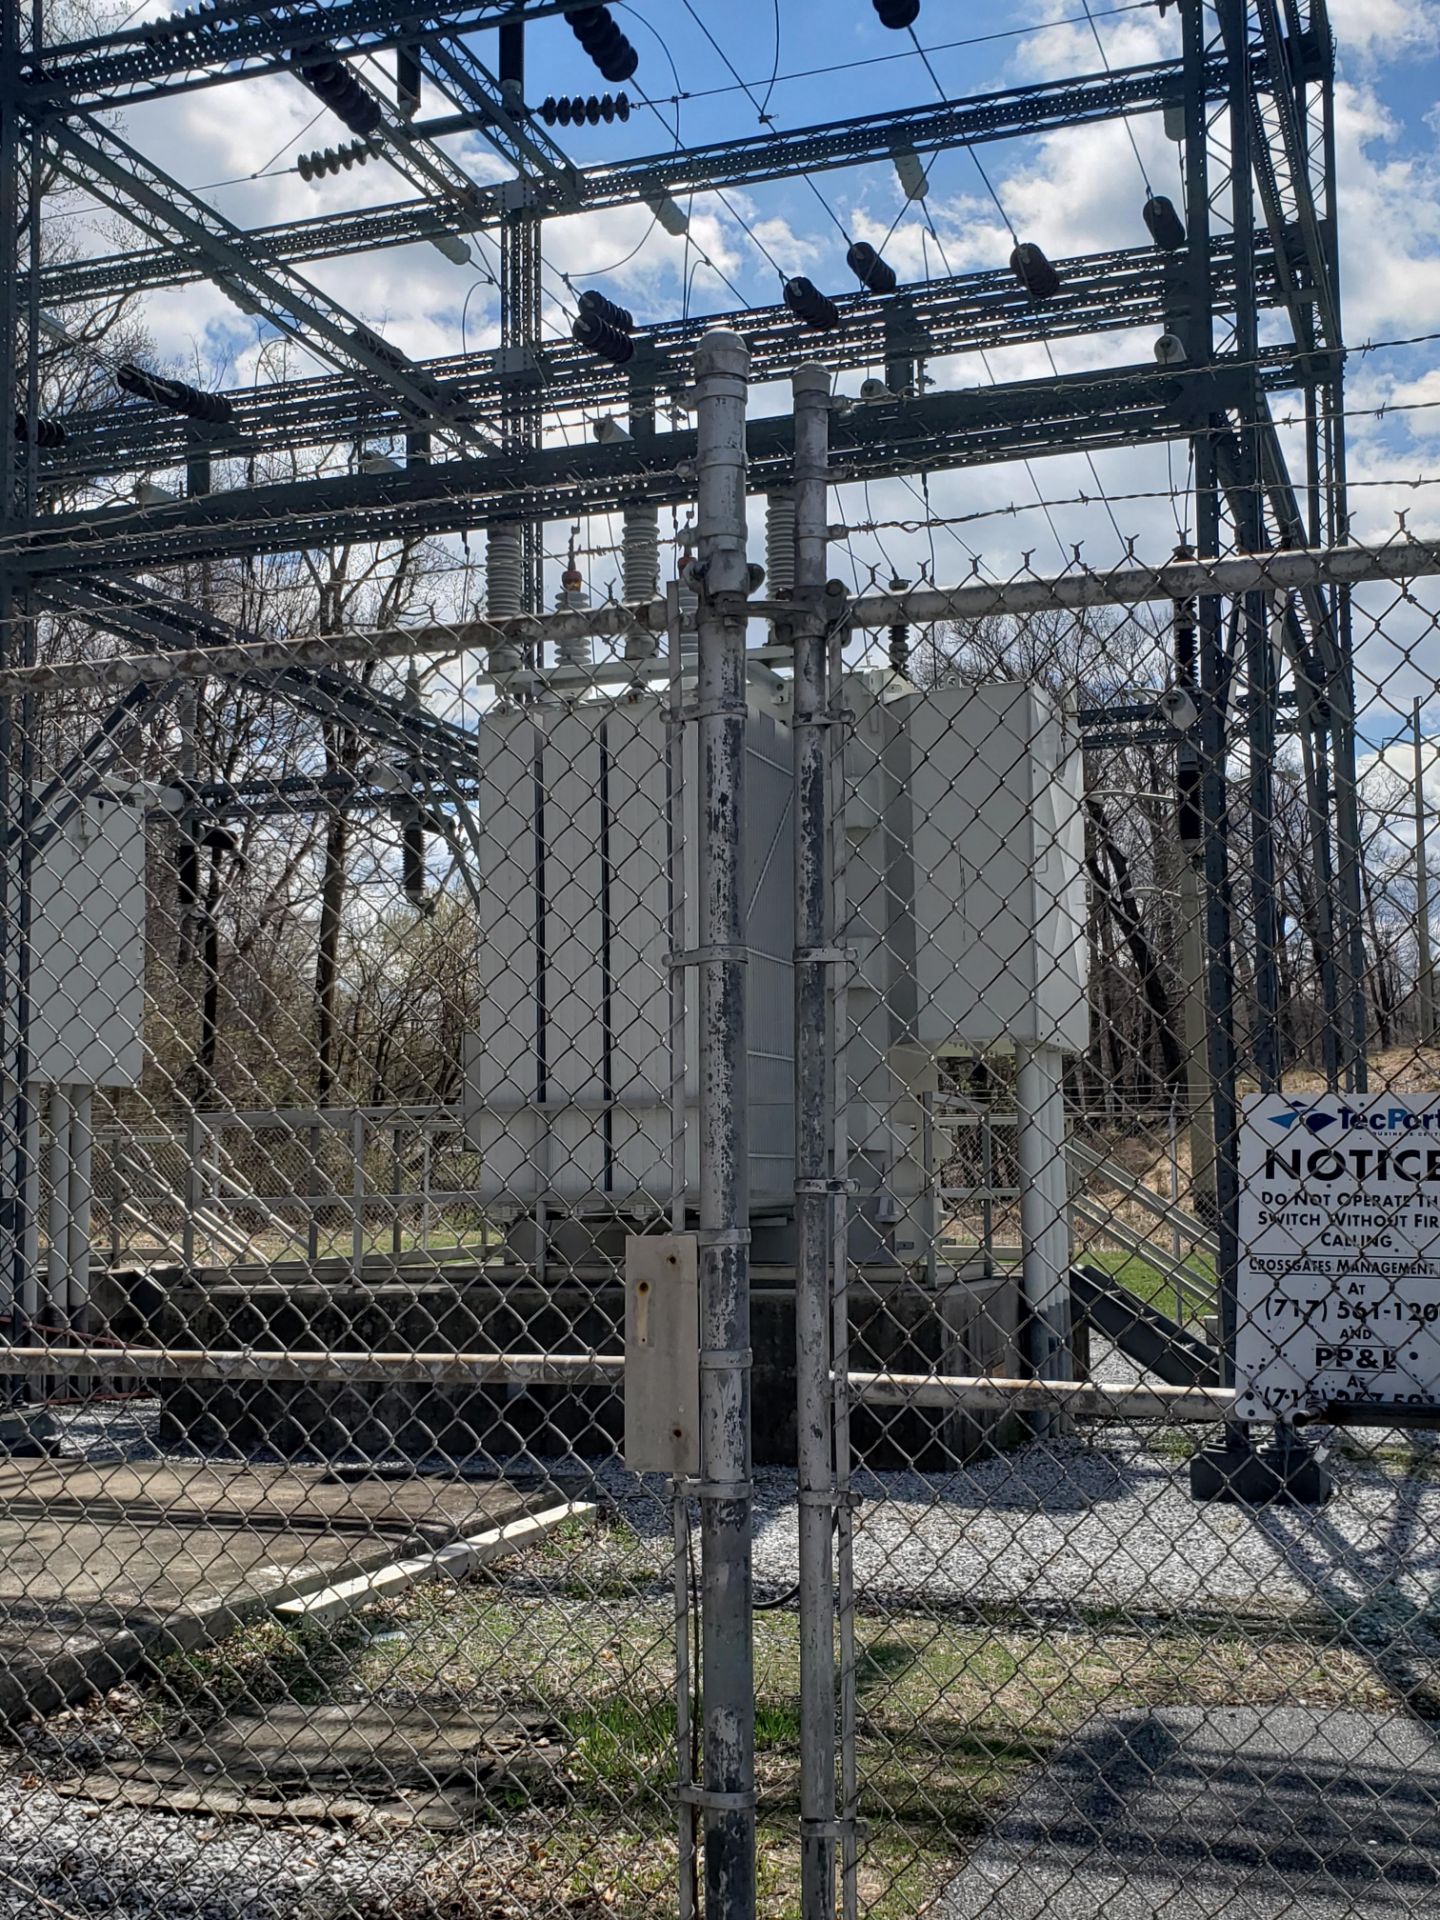 Electrical substation serving the TecPort business park - Image 13 of 15